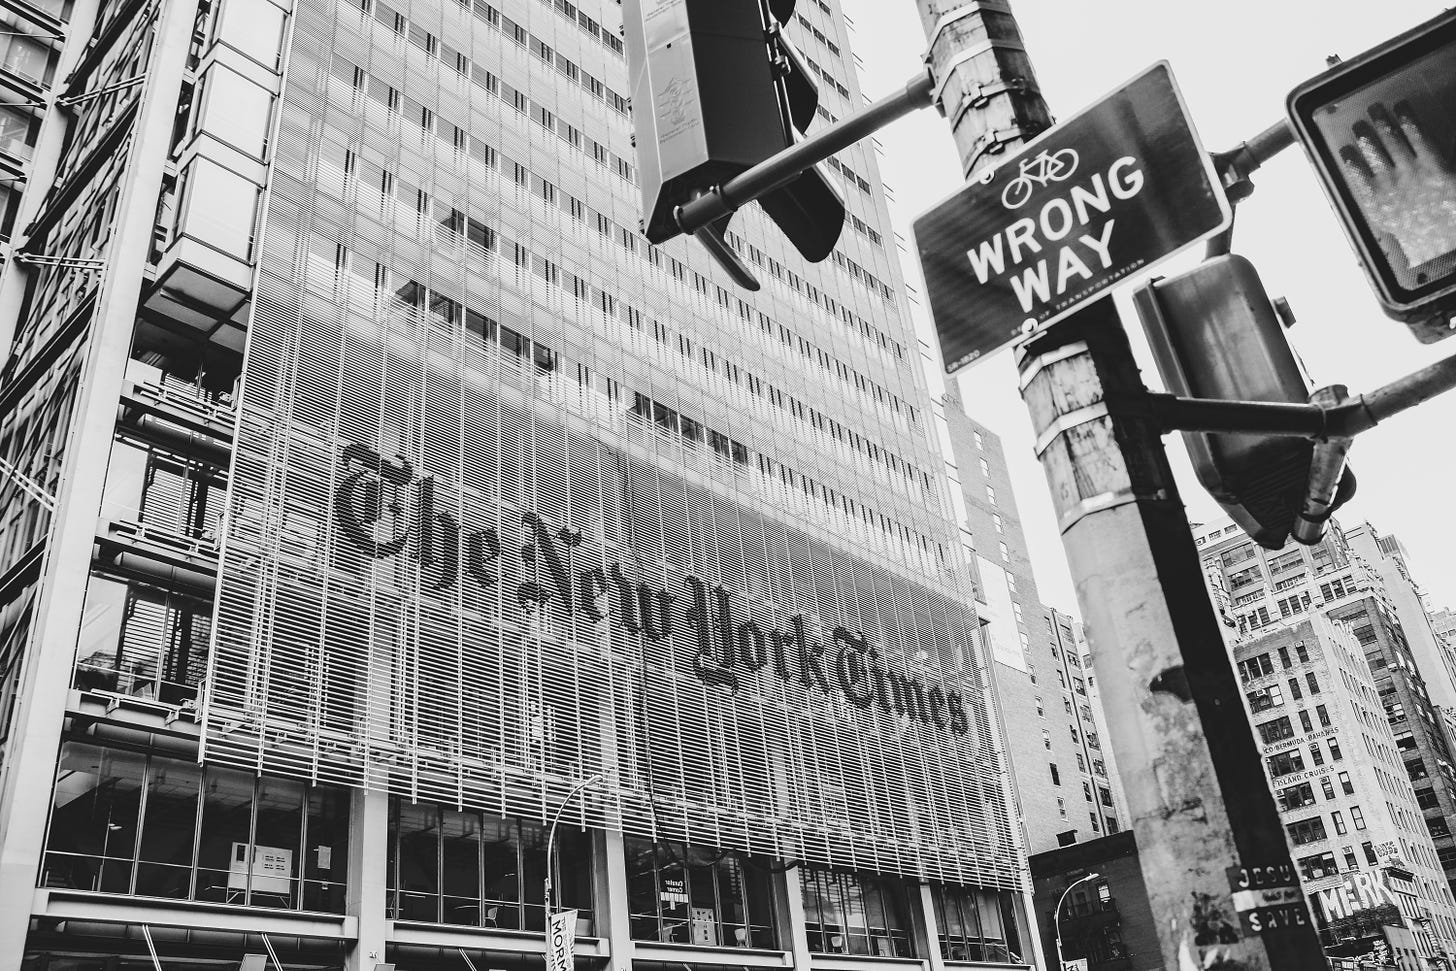 The New York Times is going the wrong way